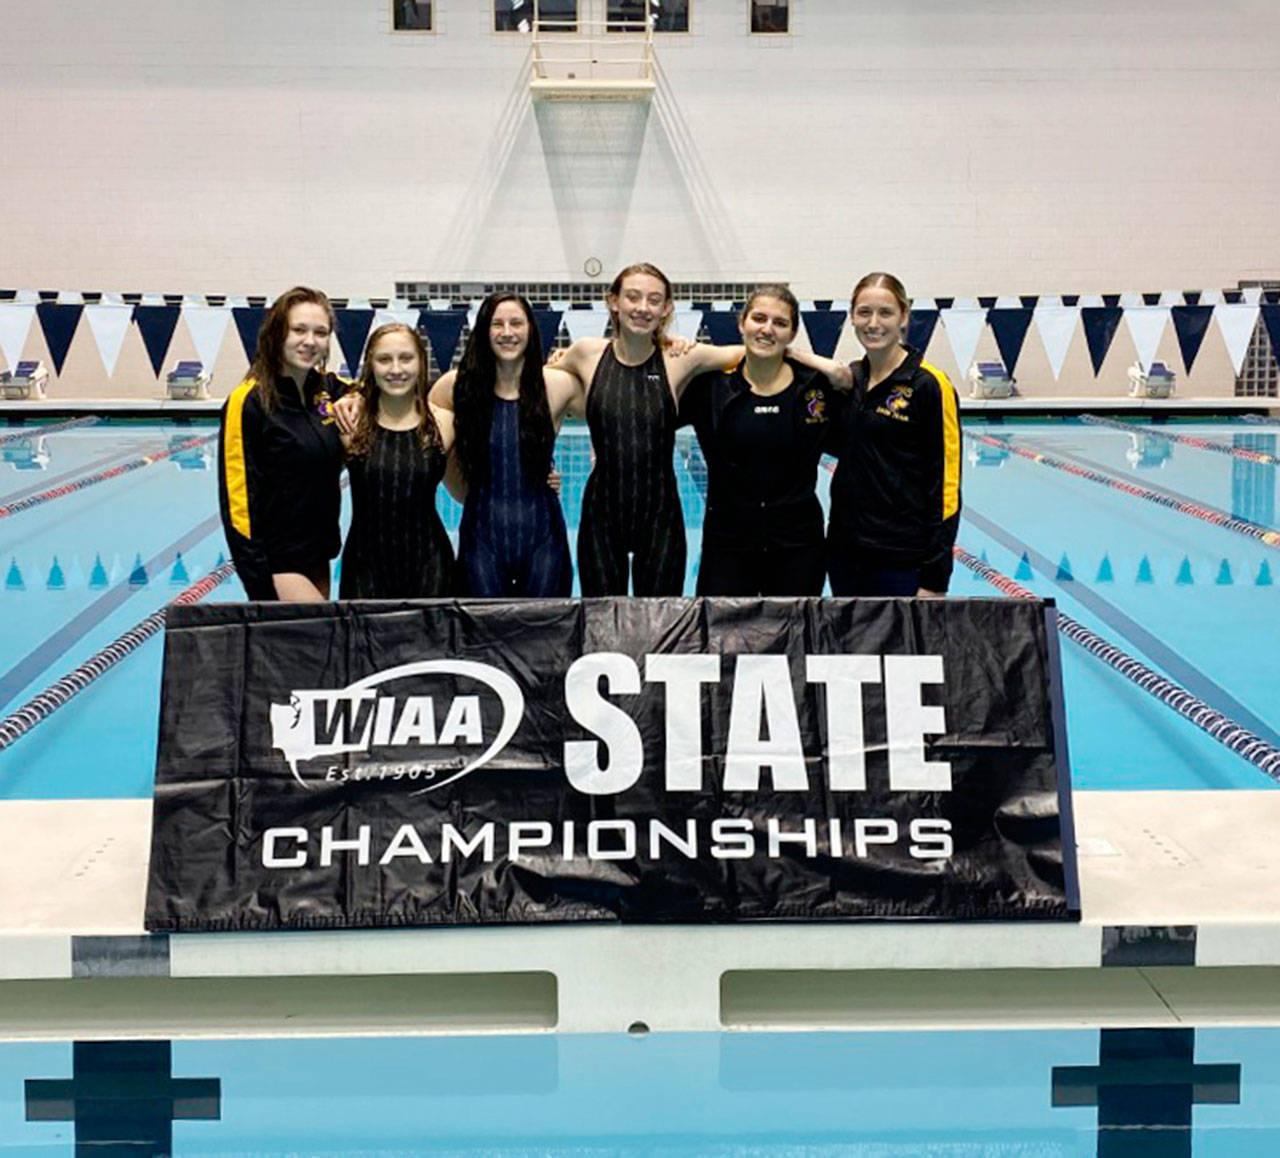 Sequim High’s girls swimming squad enjoys a weekend of top competition at the state 2A meet, held Nov. 15-16 in Federal Way. Sequim’s state 2A competitors include, from left, are Eislynn Flood, Natalie George, Lauren Sundin, Mia Coffman, Francesca Bargis and head coach Sarah Thorson. Submitted photo